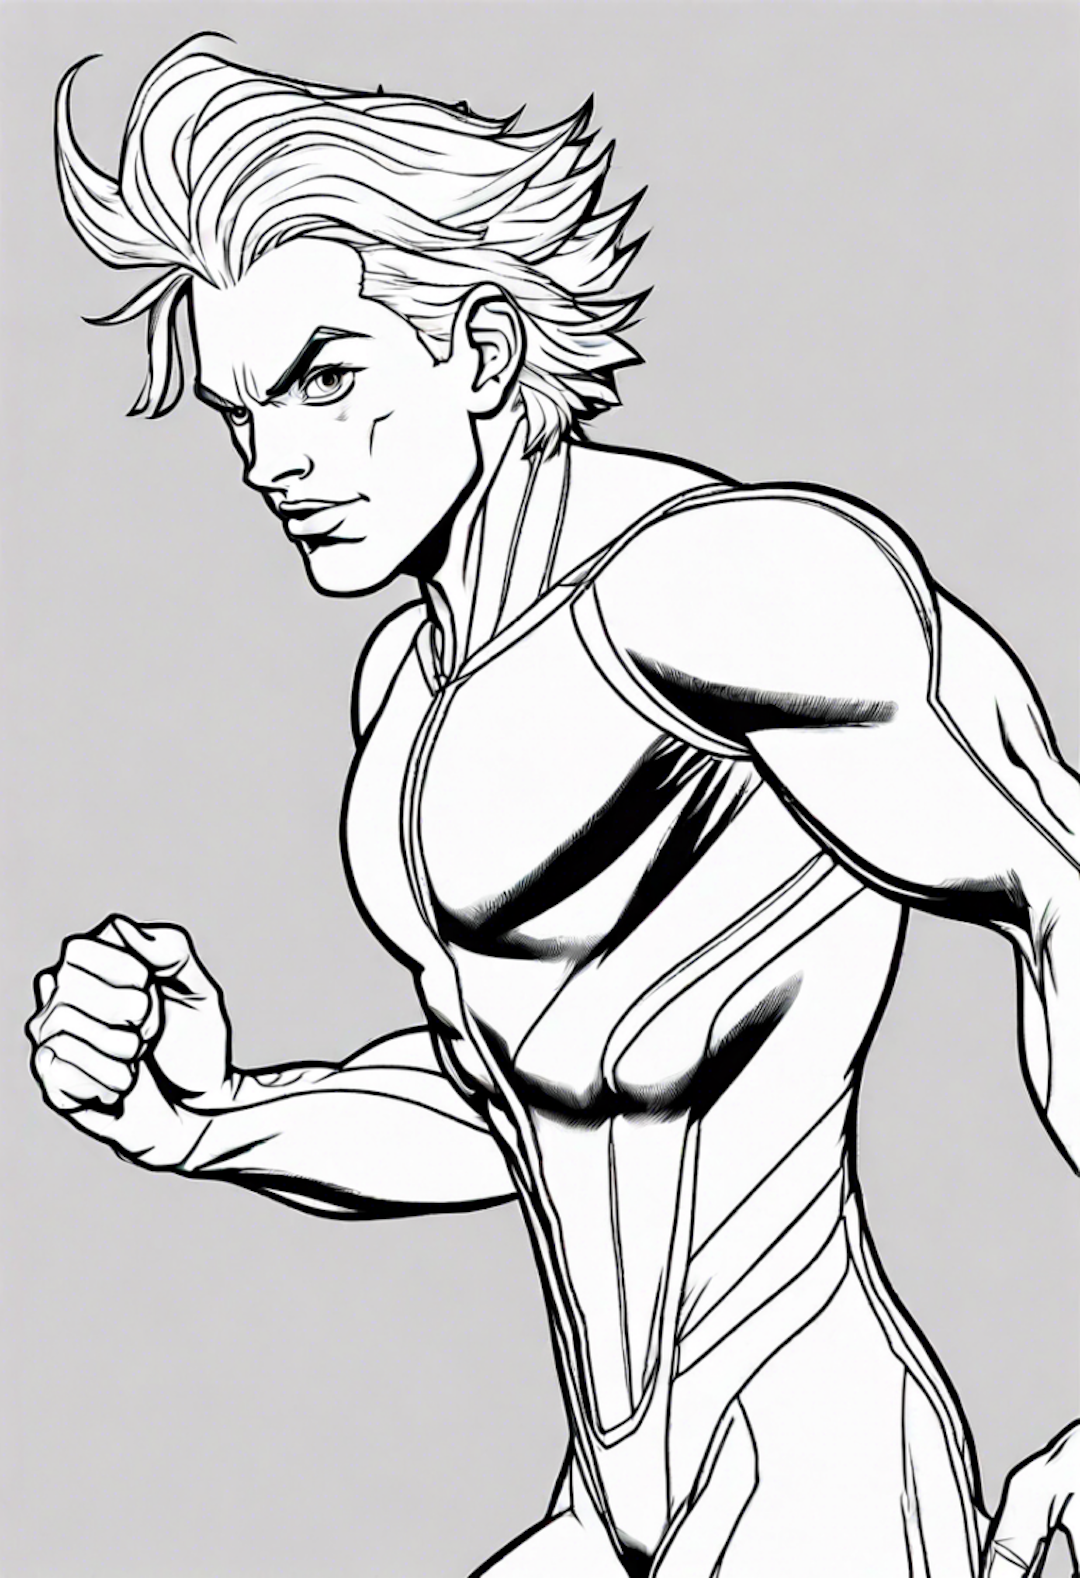 The Fast Hero in Action Coloring Page coloring pages